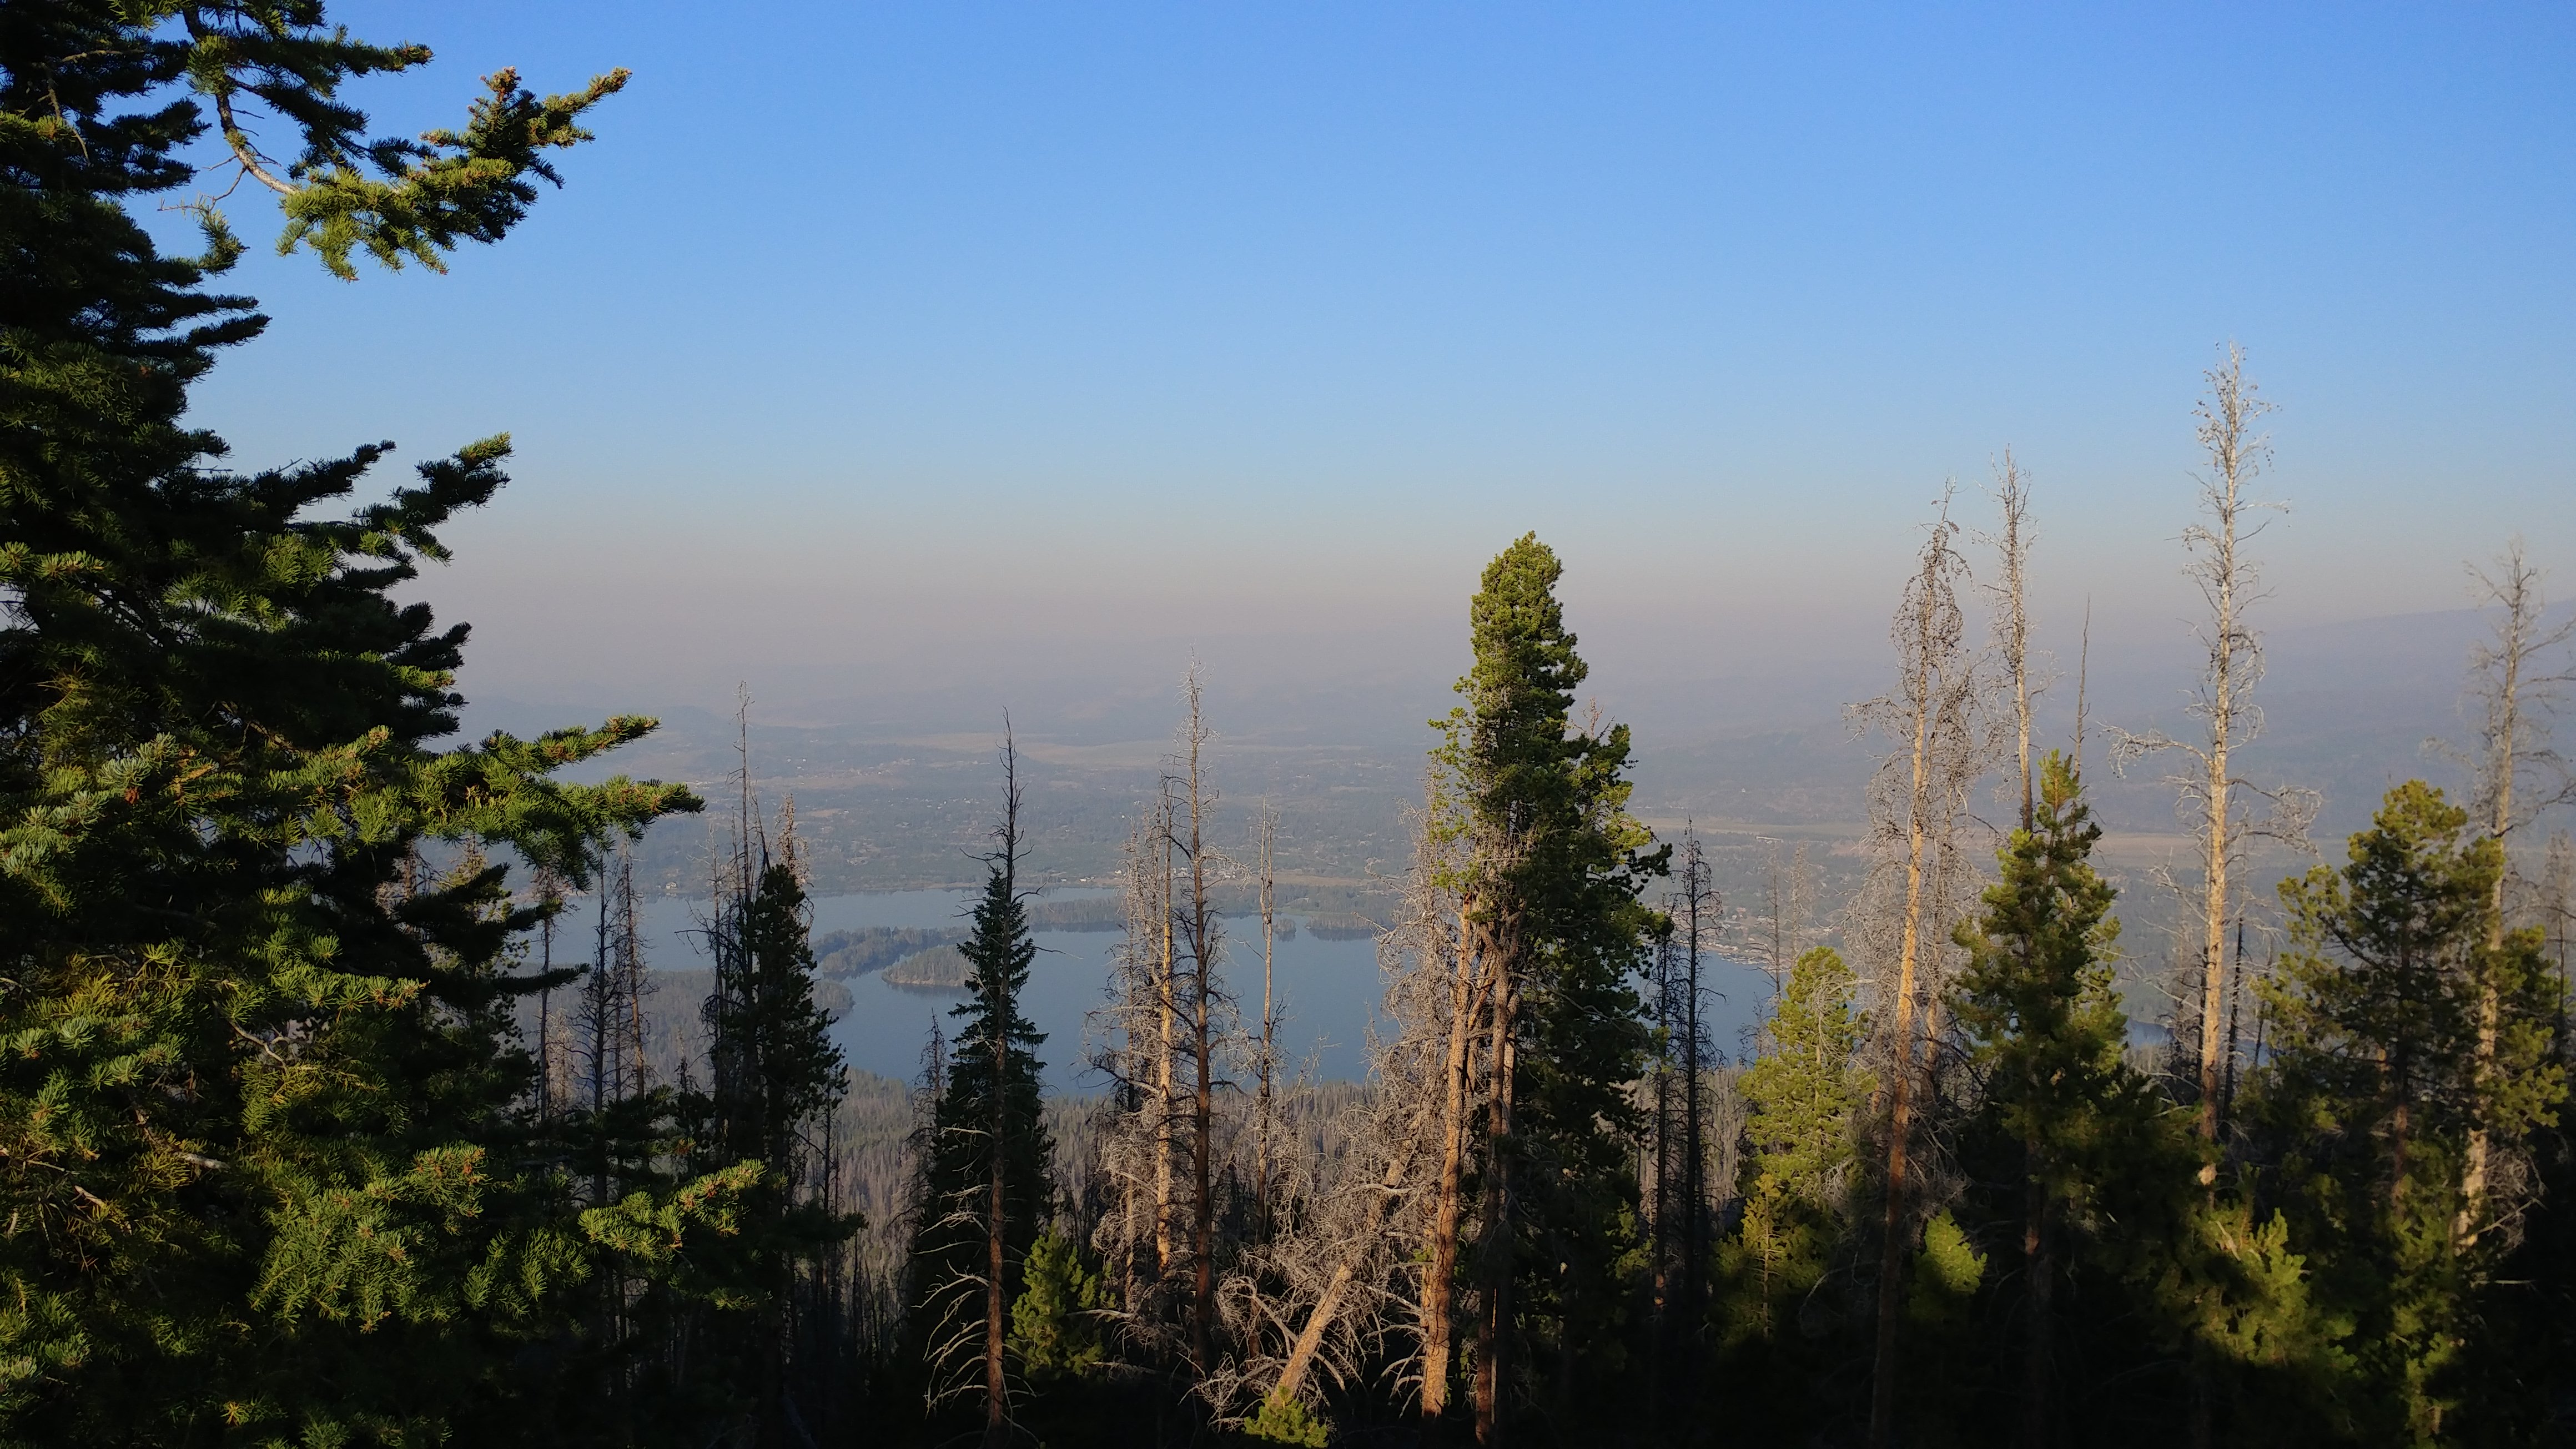 Framed by tall green pine trees, this photo of lakes and mountains shows the lower elevations blanketed in an amber-colored layer of smoke from wildfires.